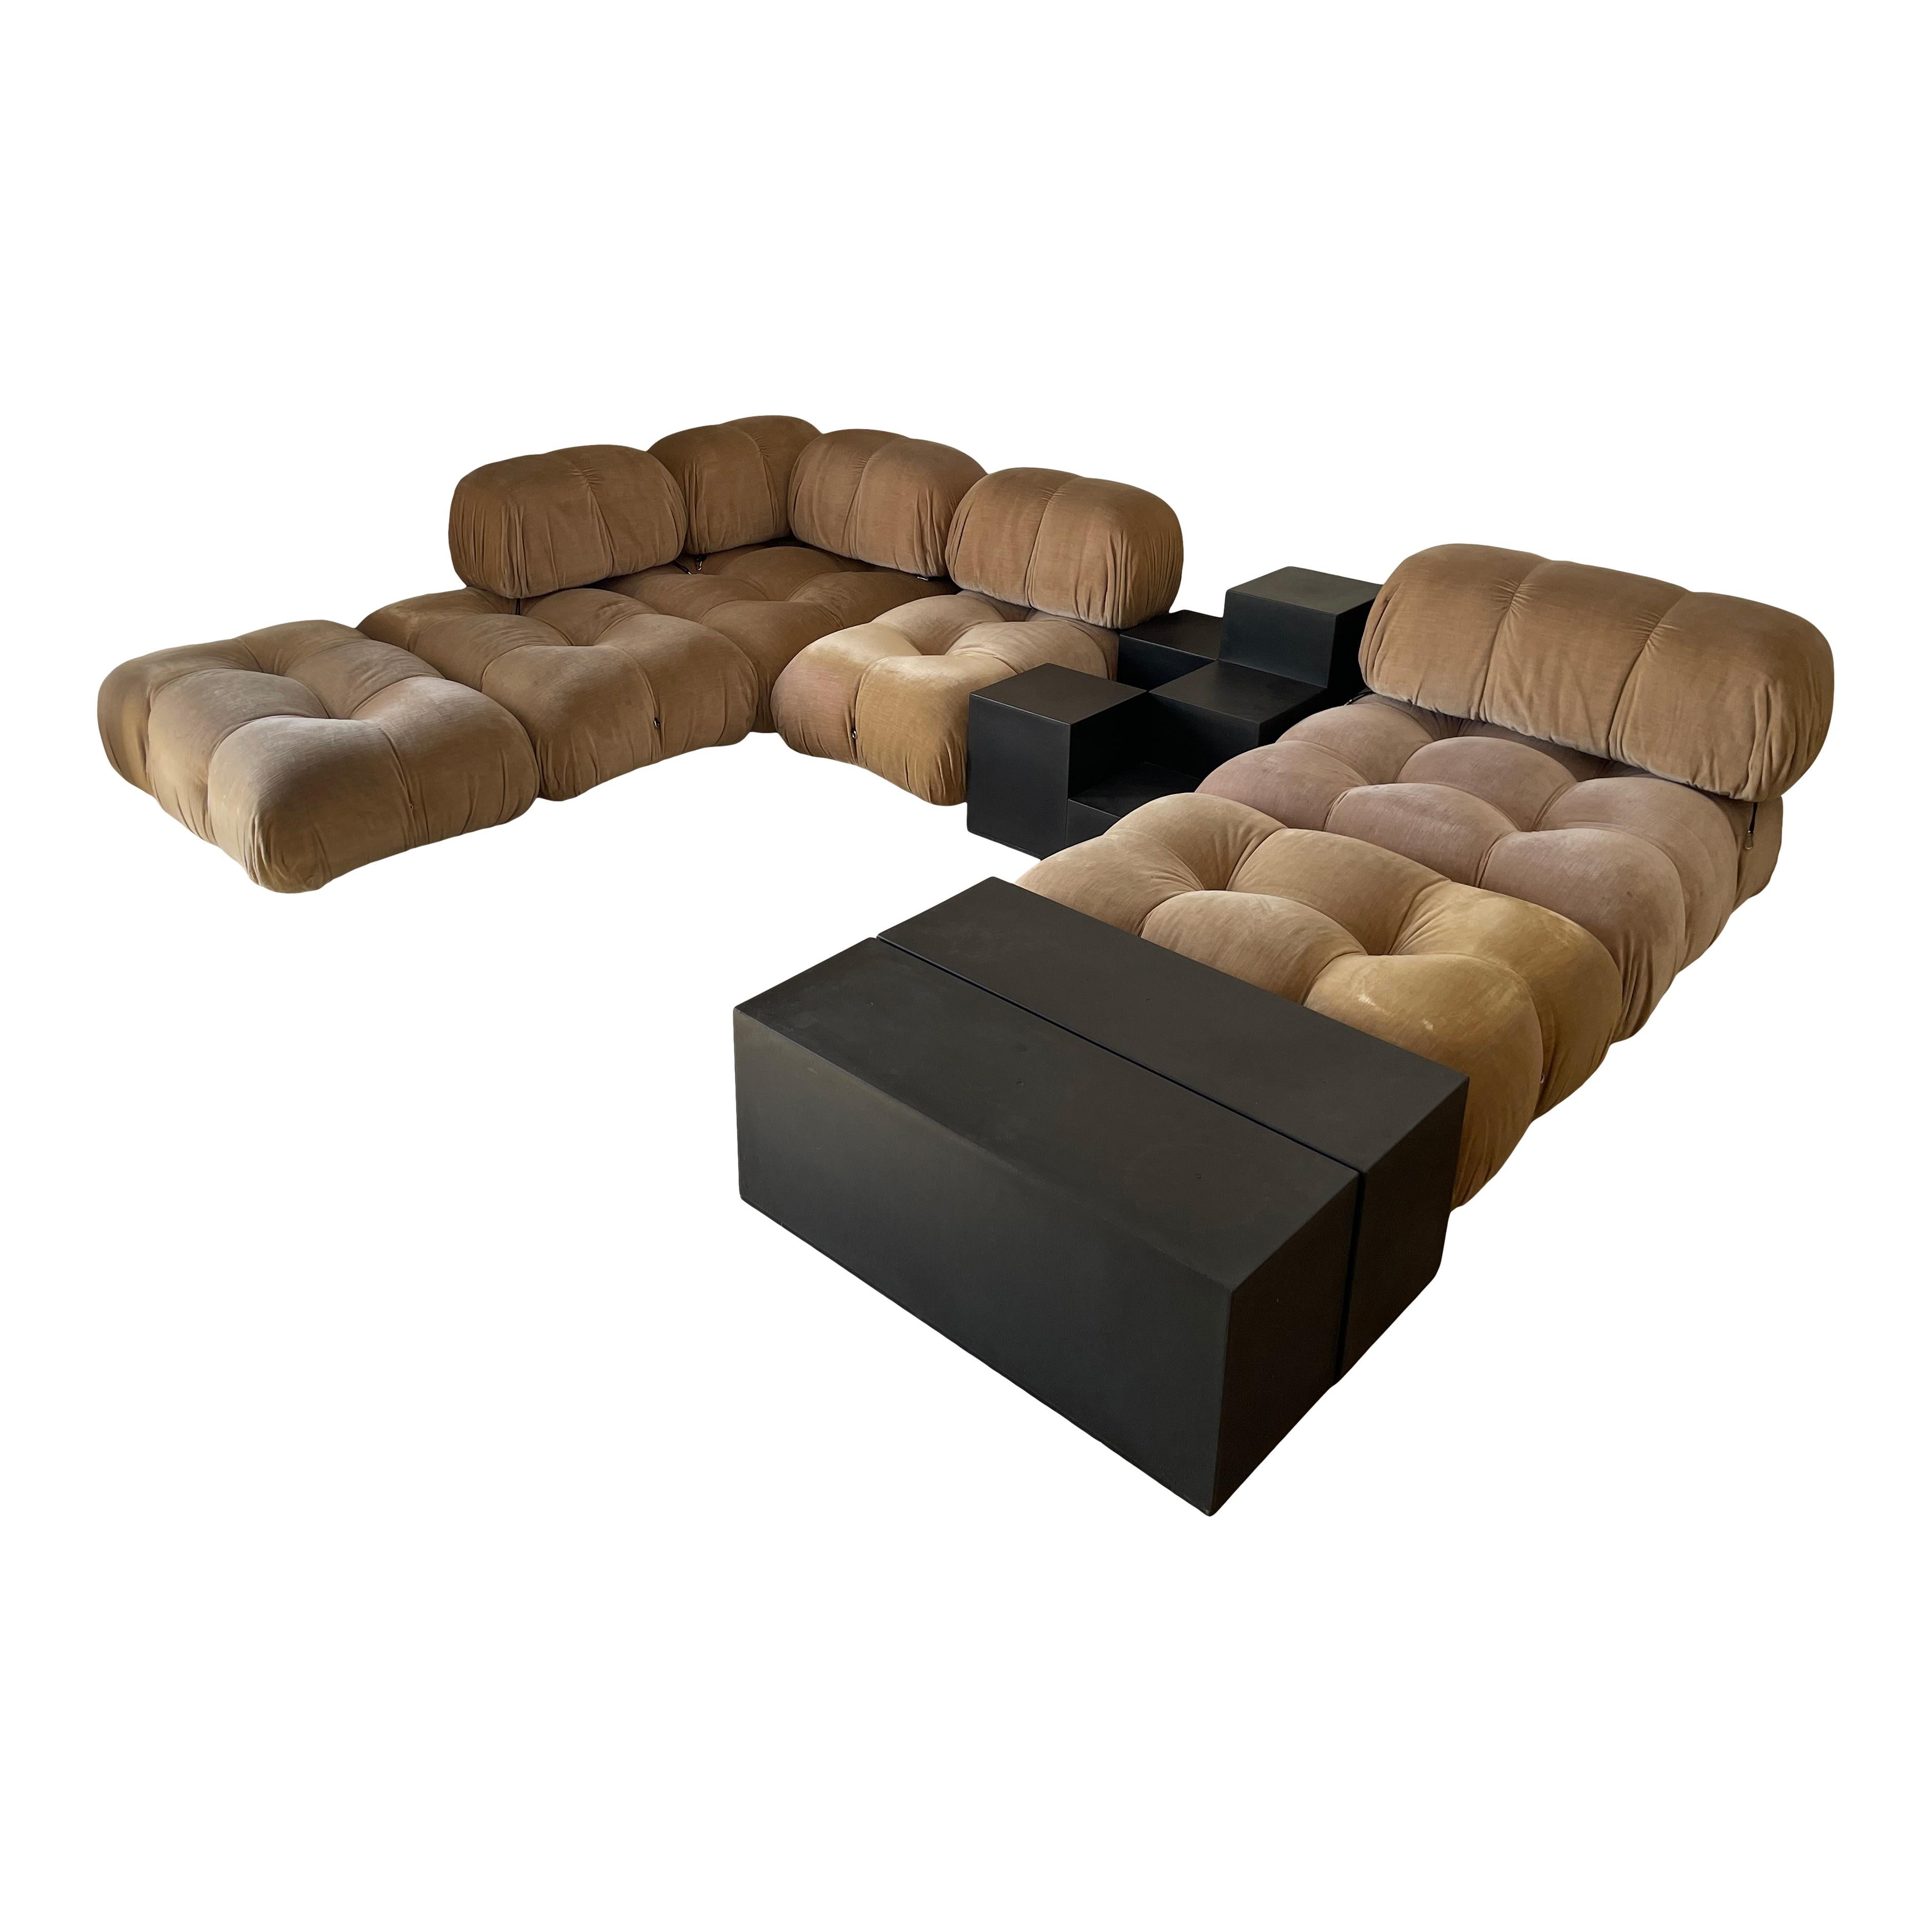 Camaleonda sofa, designed by Mario Bellini and manufactured by B&B Italia in 1972.

The set features two big modules and four small ones.

Taupe cotton velvet upholstery.

Excellent vintage condition.

The sofa is very comfortable, and the fact this